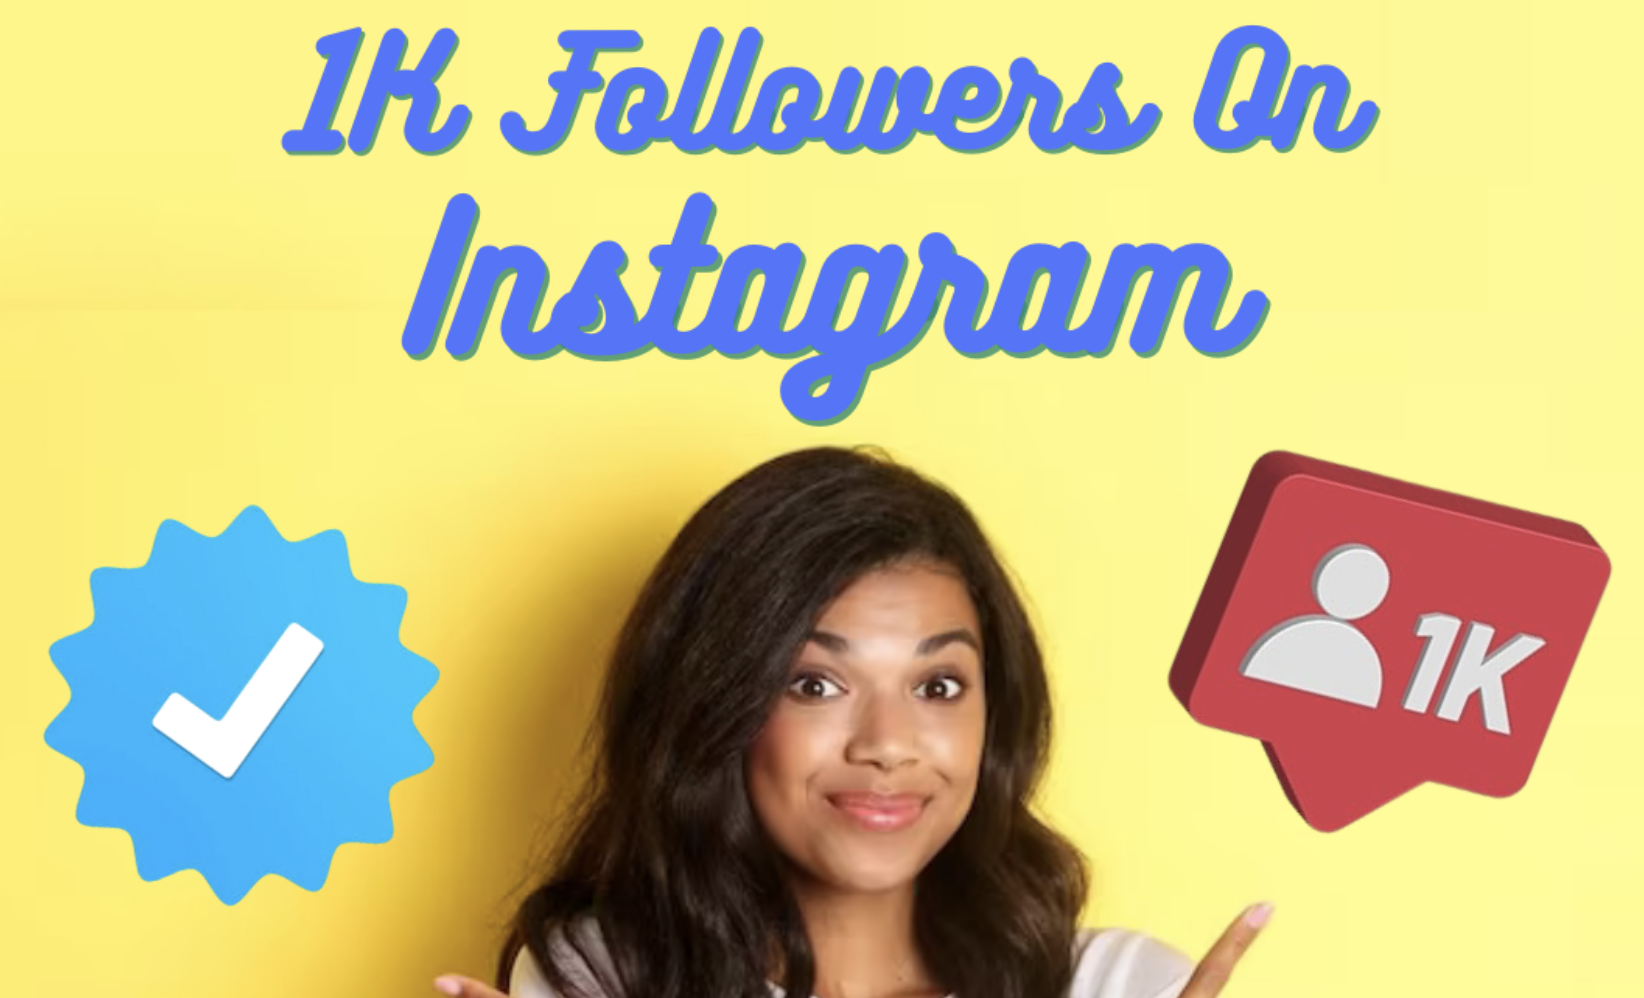 The Ultimate Guide to Reaching 1k Followers on Instagram Like a Pro